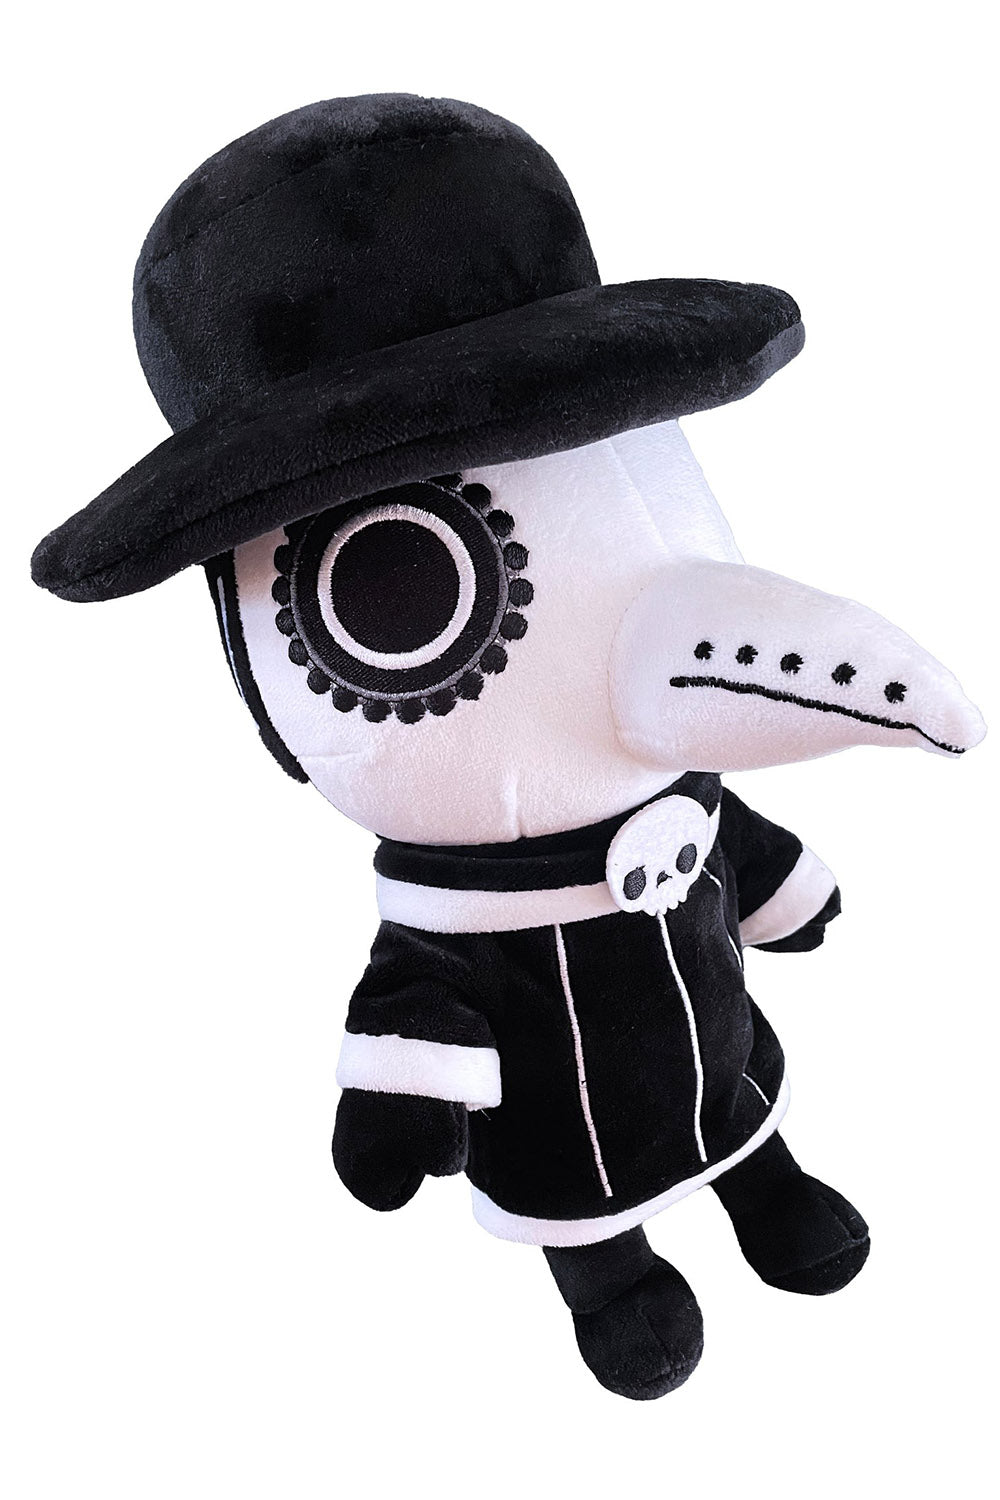 spooky plushie toy